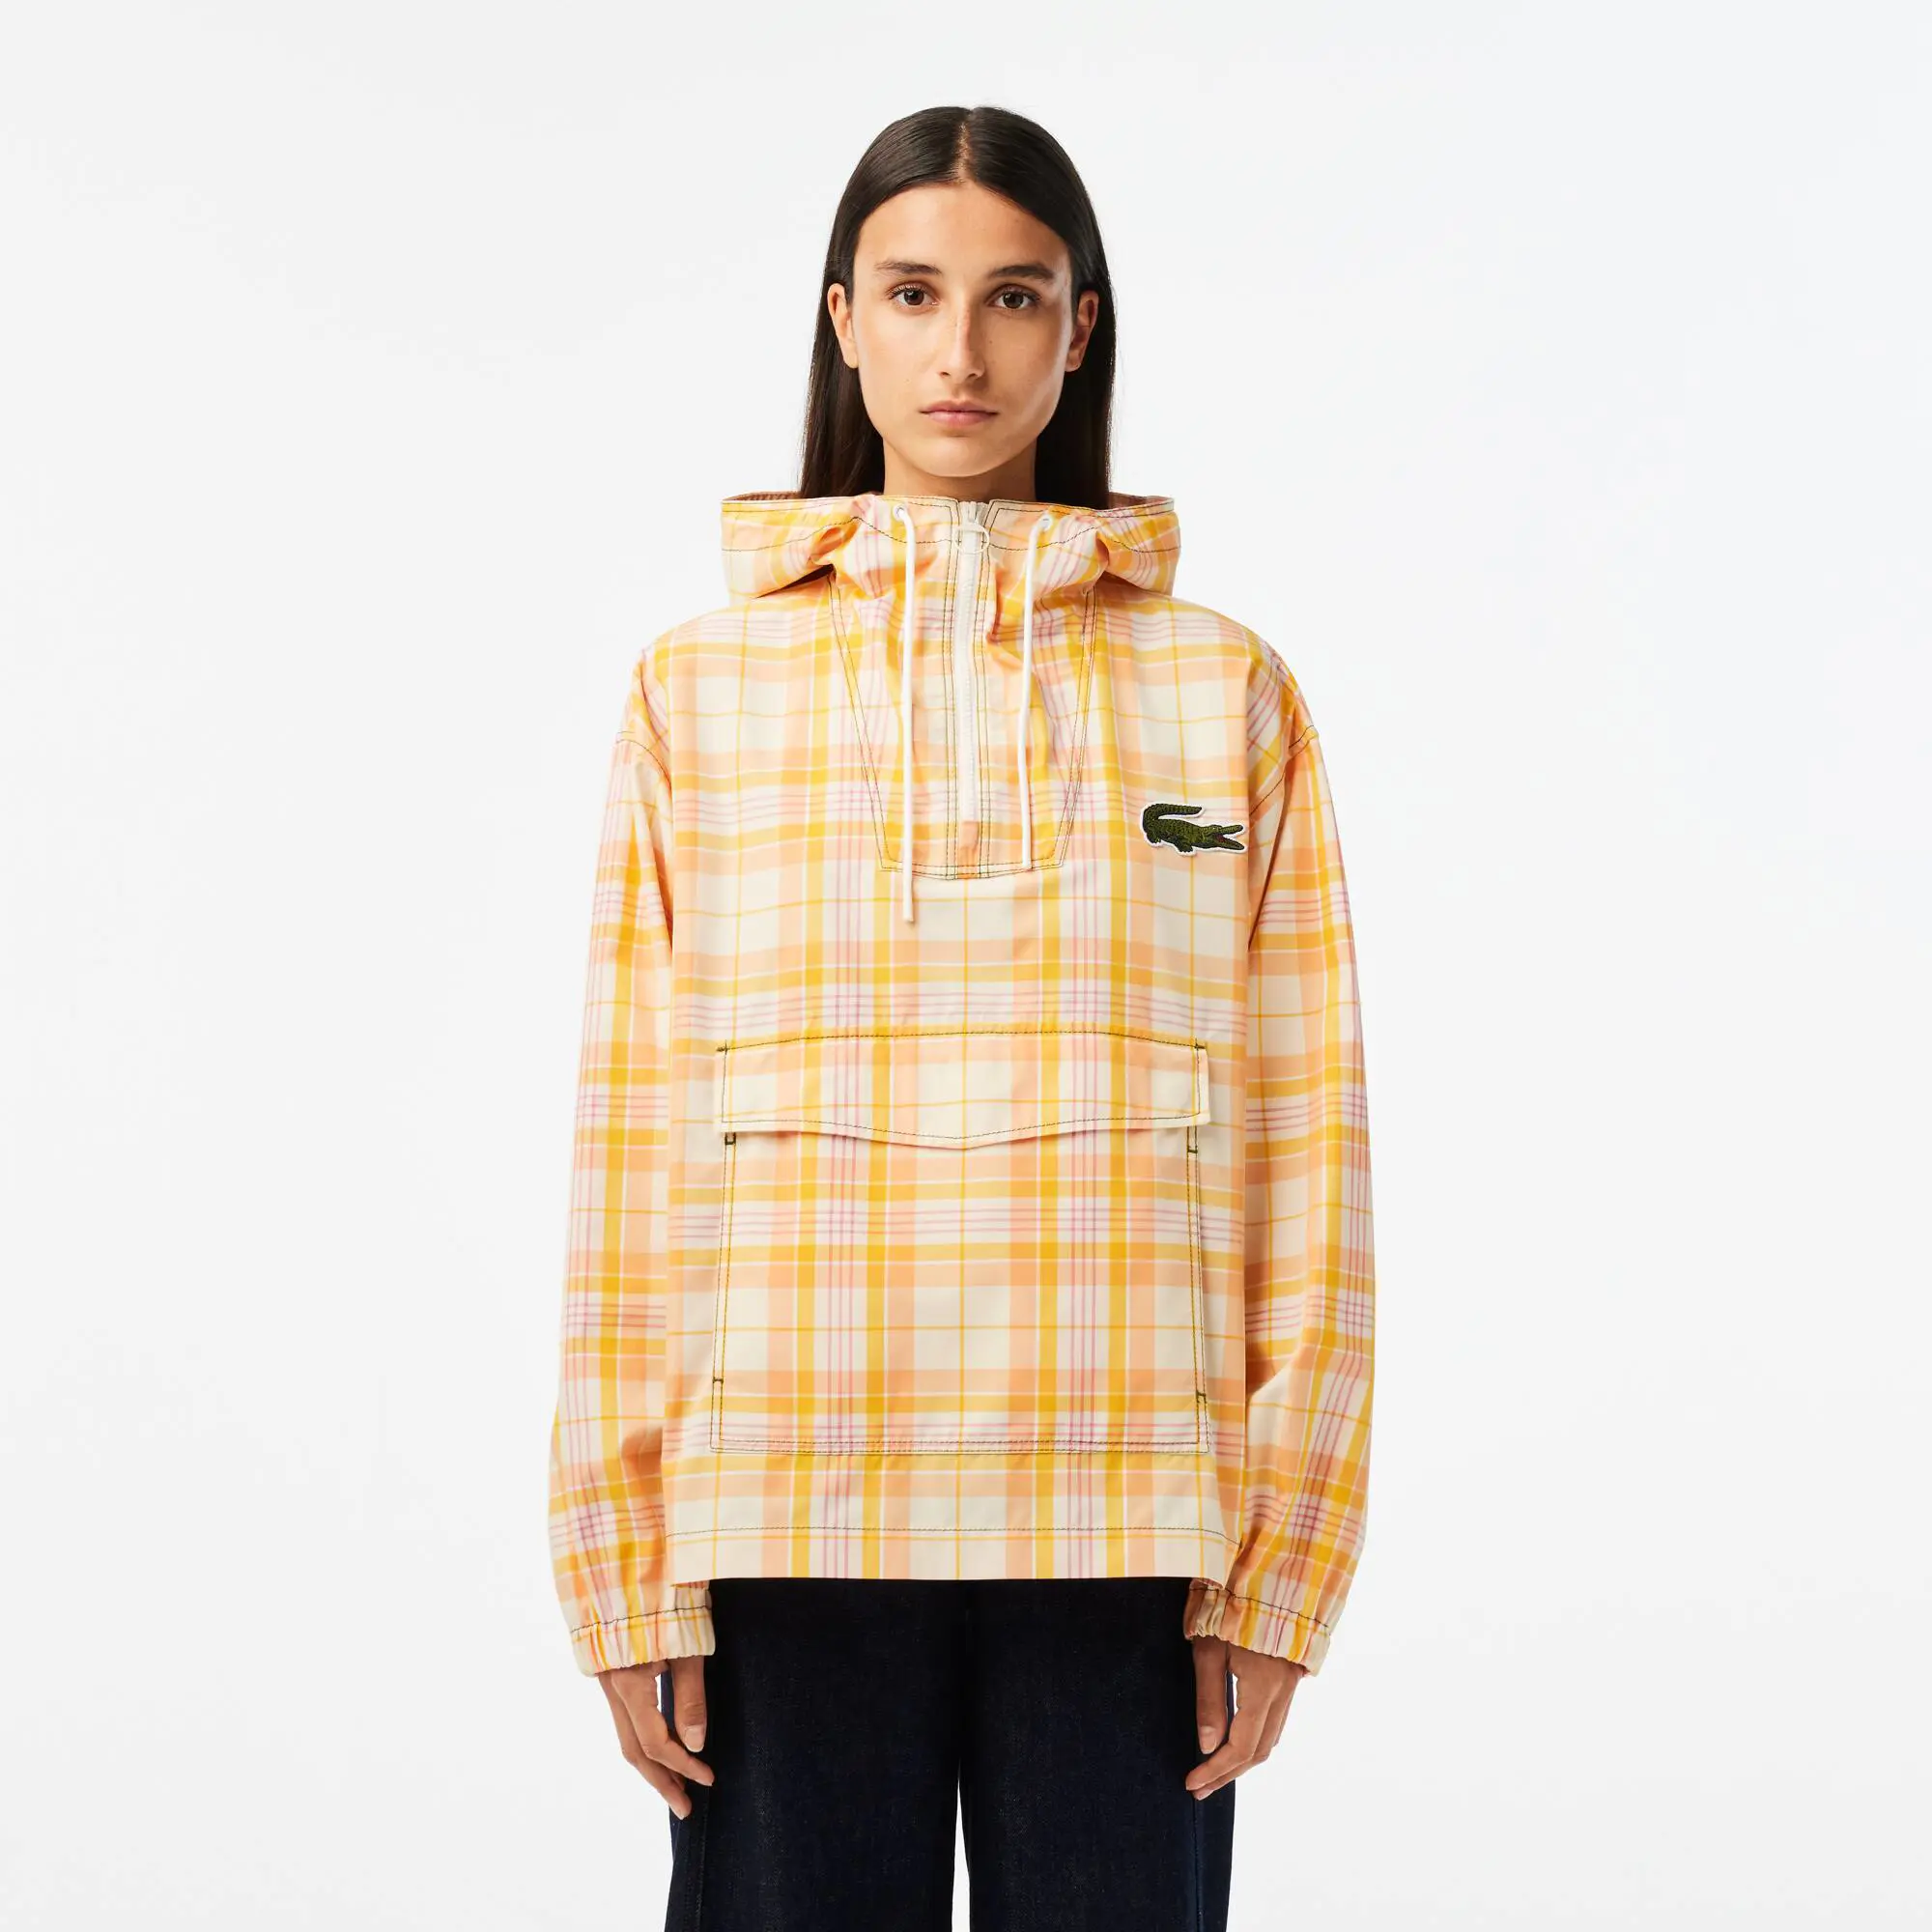 Lacoste Women’s Lacoste Checked Pull-on Jacket. 1